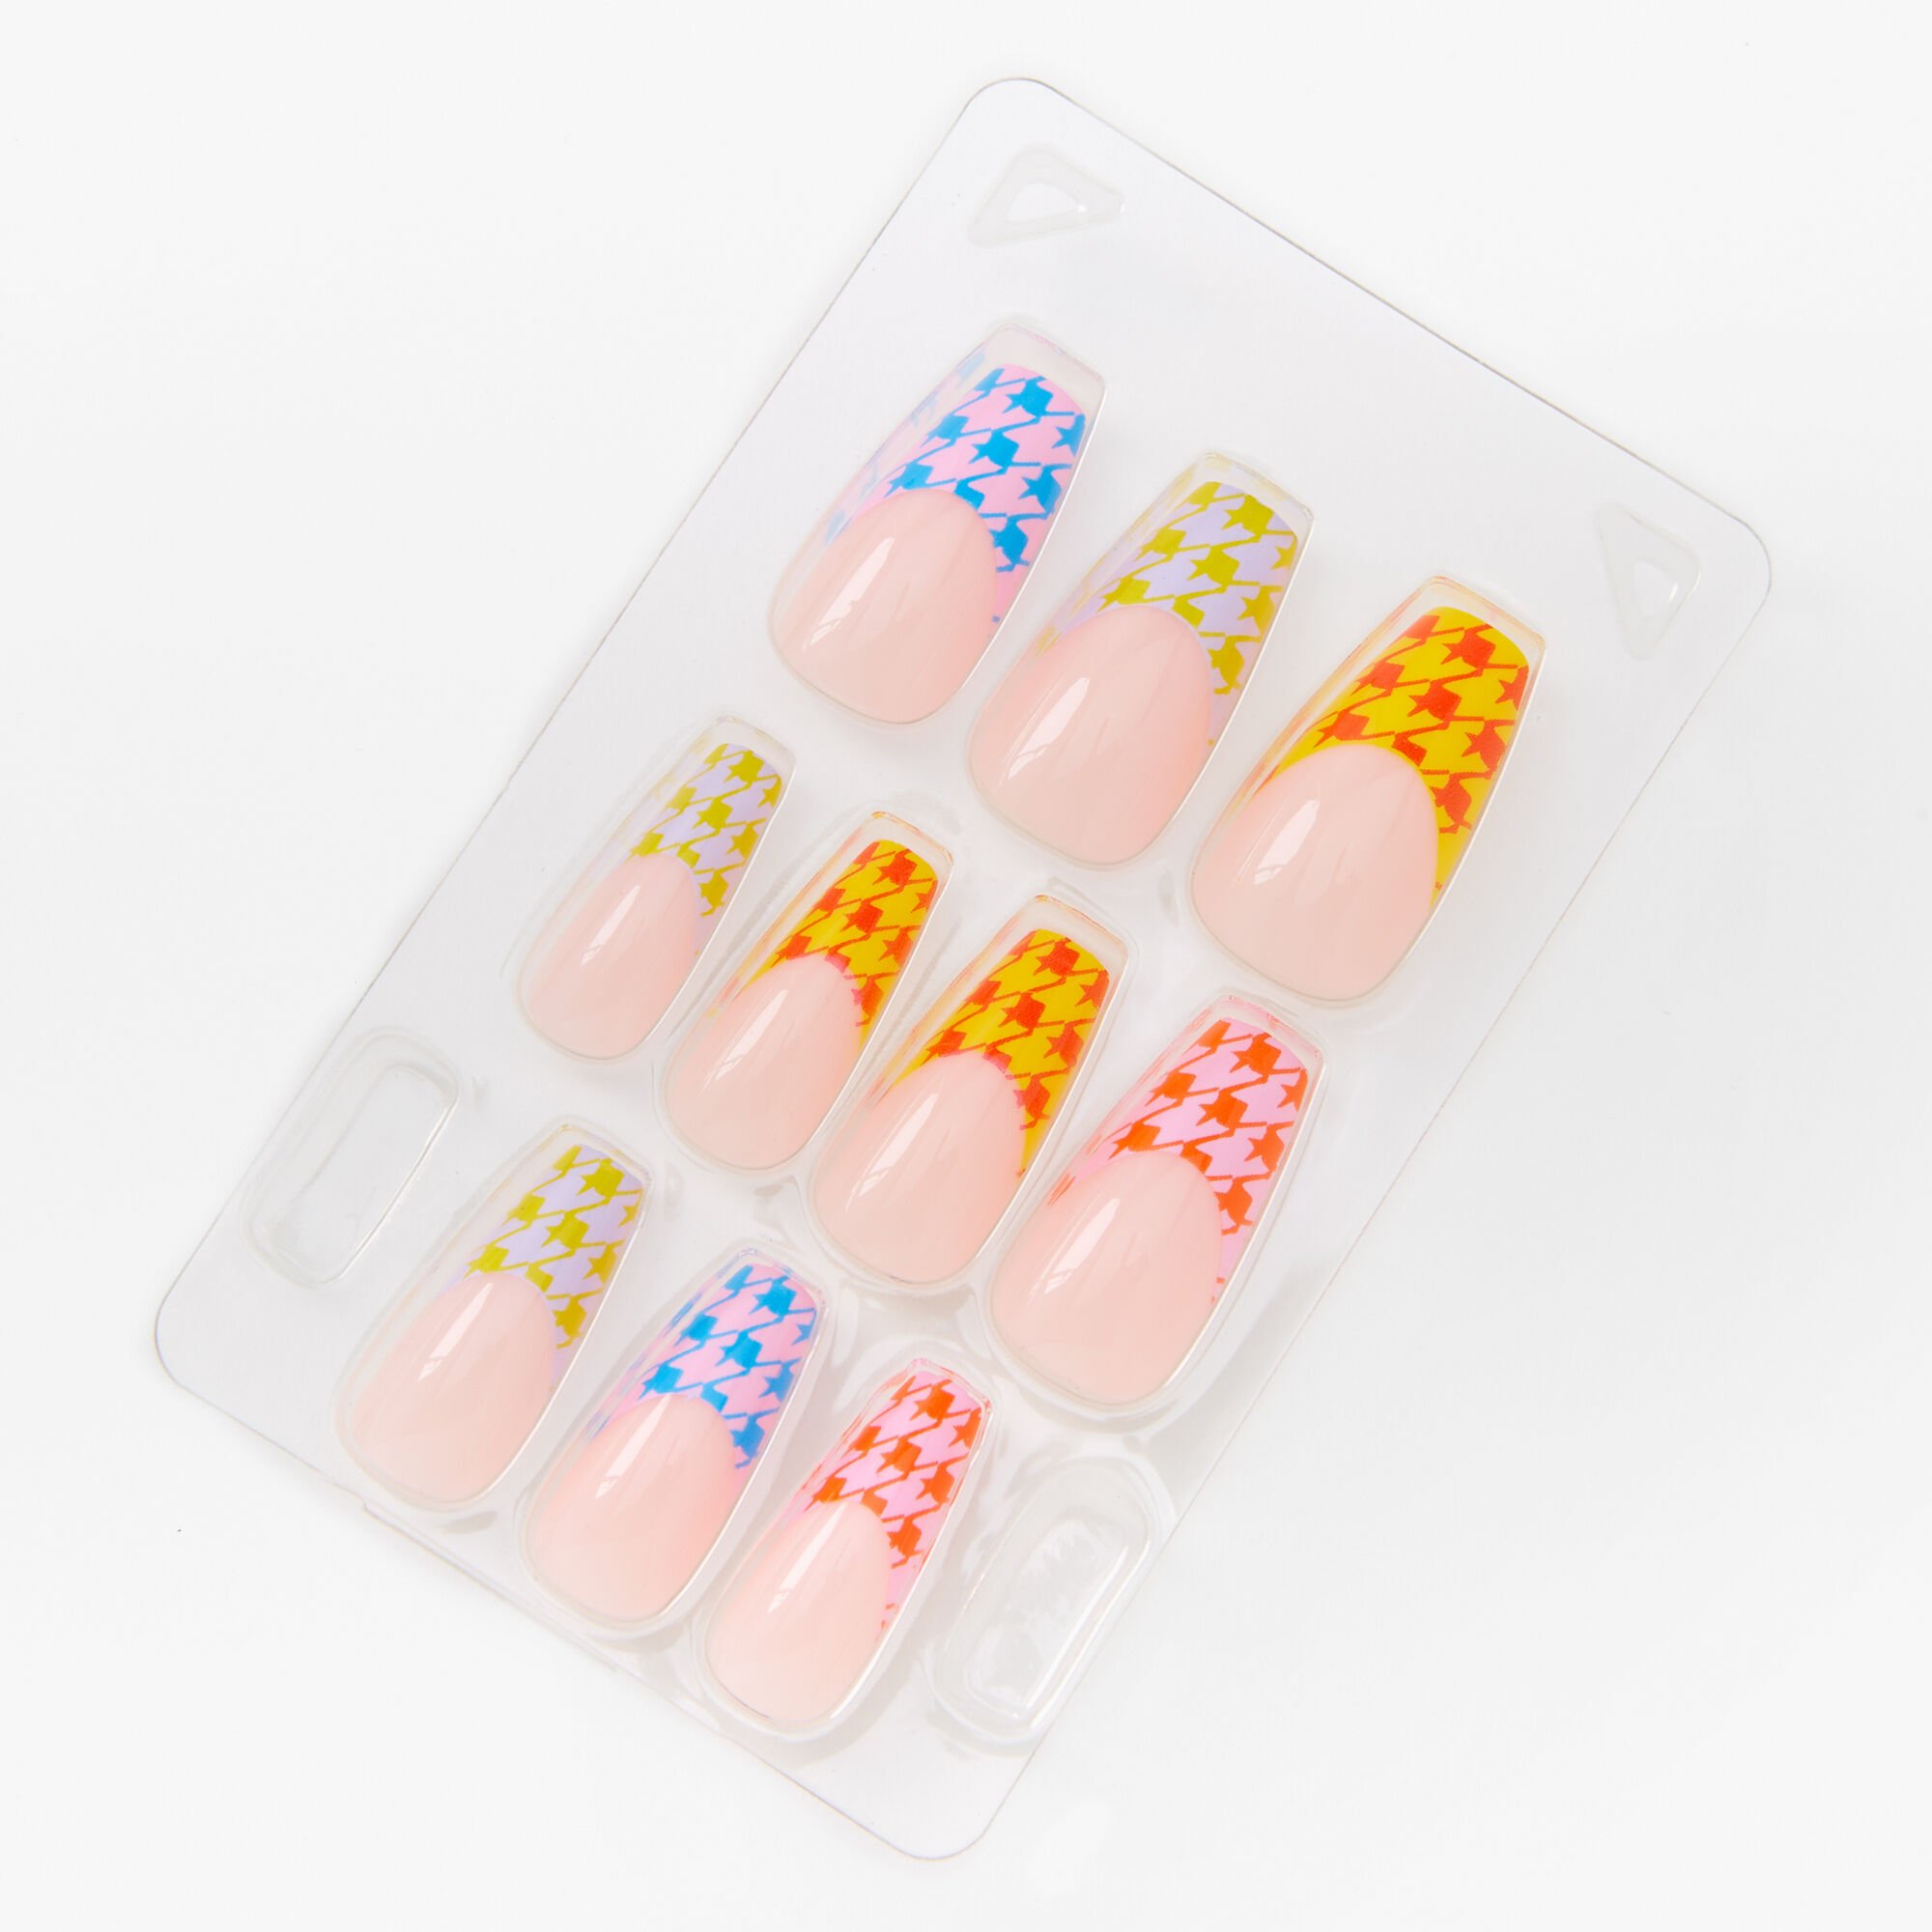 View Claires Houndstooth Squareletto Press On Vegan Faux Nail Set 24 Pack Rainbow information